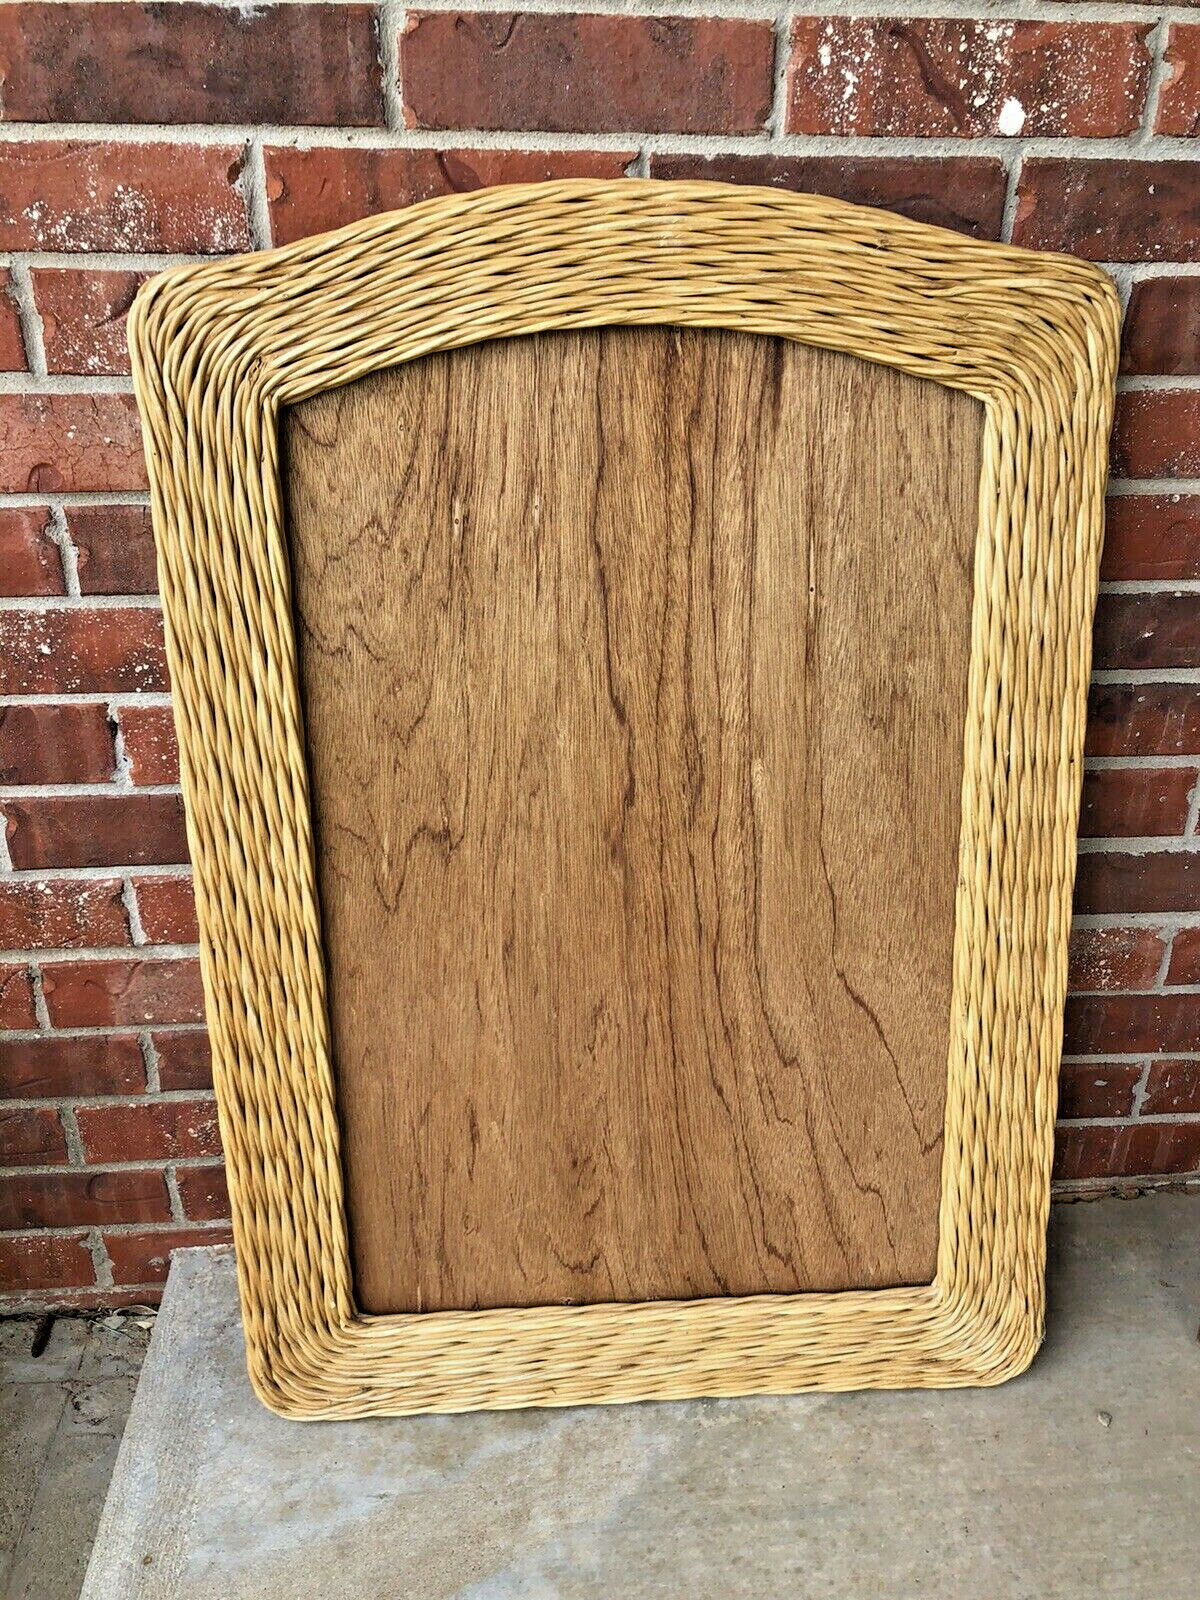 3 FT Woven Frame Only Brown Wicker Ideal for Mirror Cottage Decor Vintage